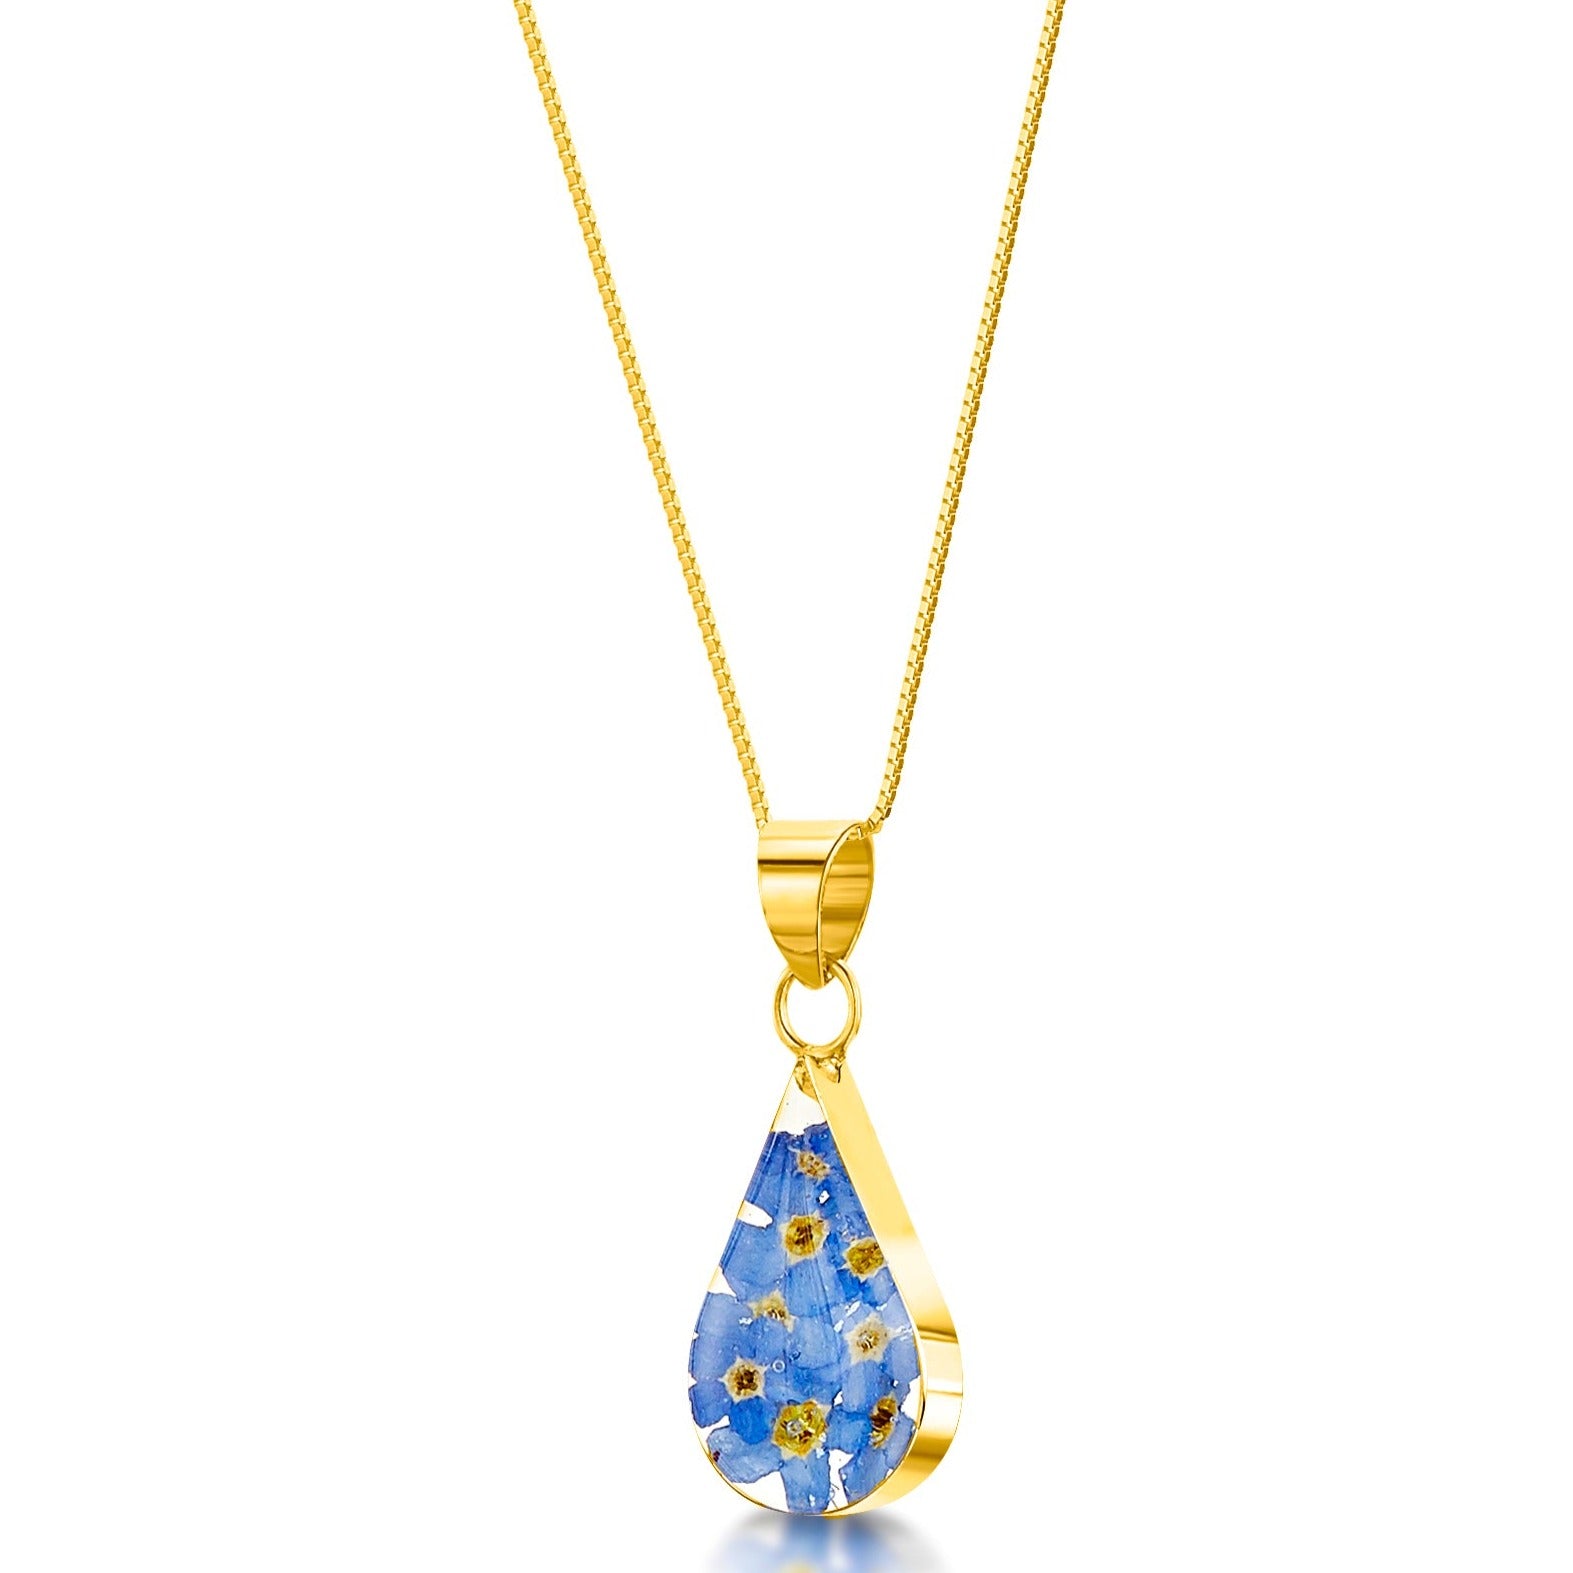 Forget-me-not gold-plated teardrop pendant